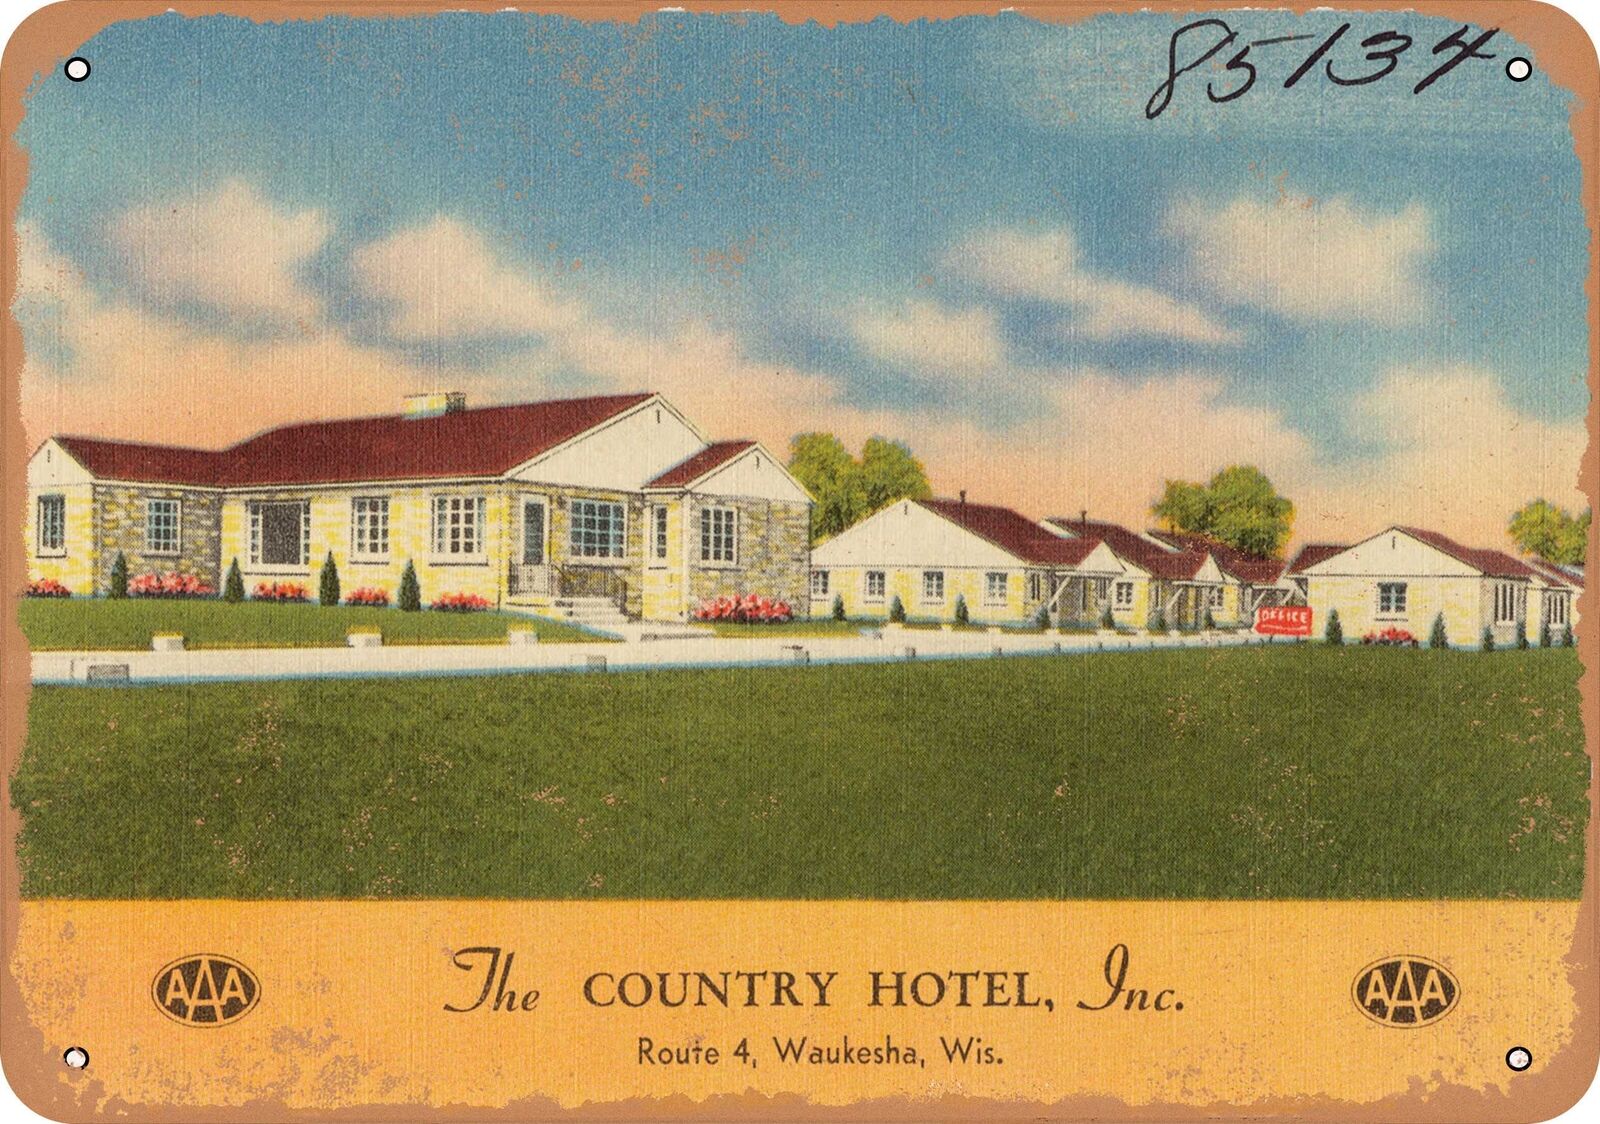 Metal Sign - Wisconsin Postcard - The Country Hotel Inc., Route 4, Waukesha, Wi